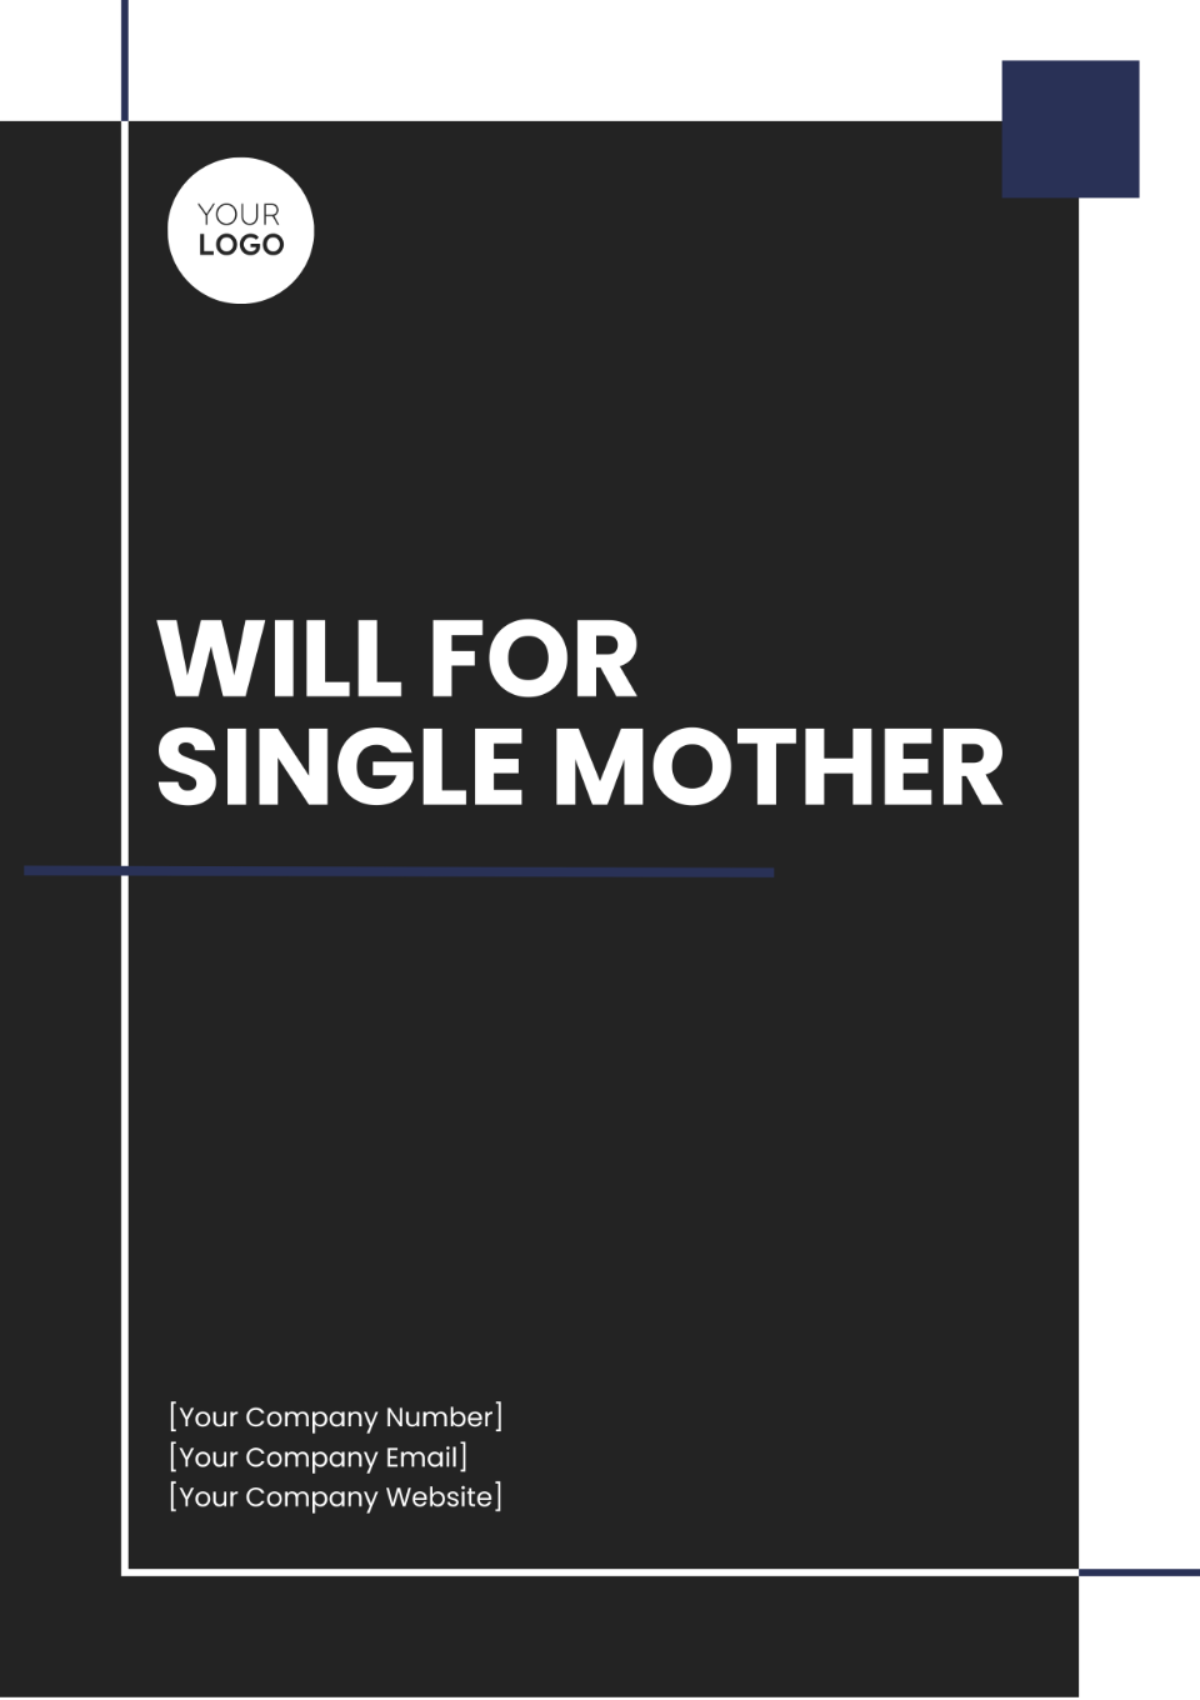 Will Template For Single Mother